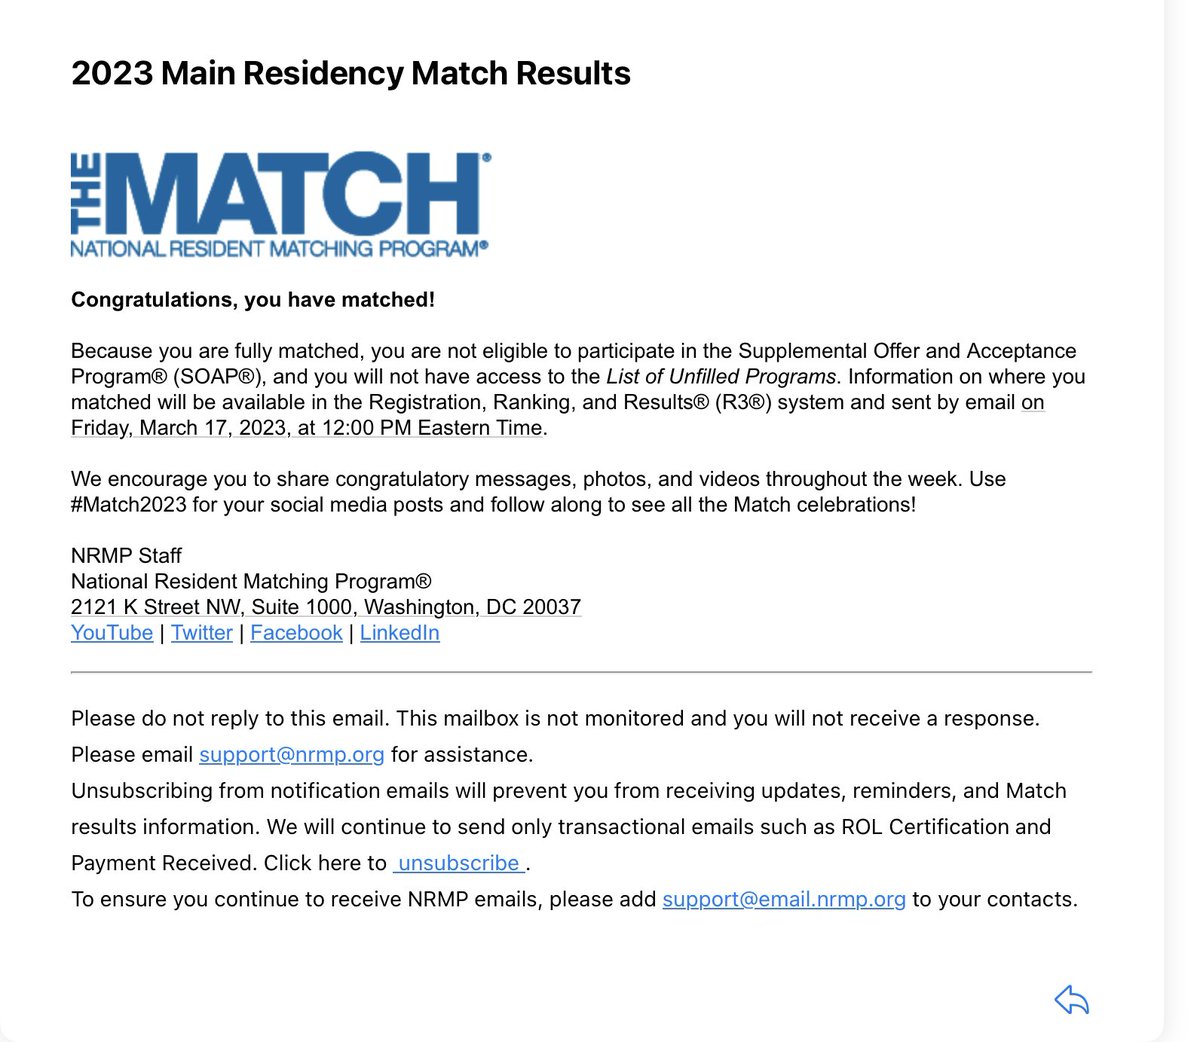 Matched !! Alhamdulillah!  Beyond grateful to my mentors, family and colleagues!! It's been a rollercoaster of emotions 🎢
To those who didn’t, this is not the end! Believe in yourself and keep pushing, you will succeed ! ✨ 
#MedTwitter #NMatch2023 #matchday2023 #neurotwitter